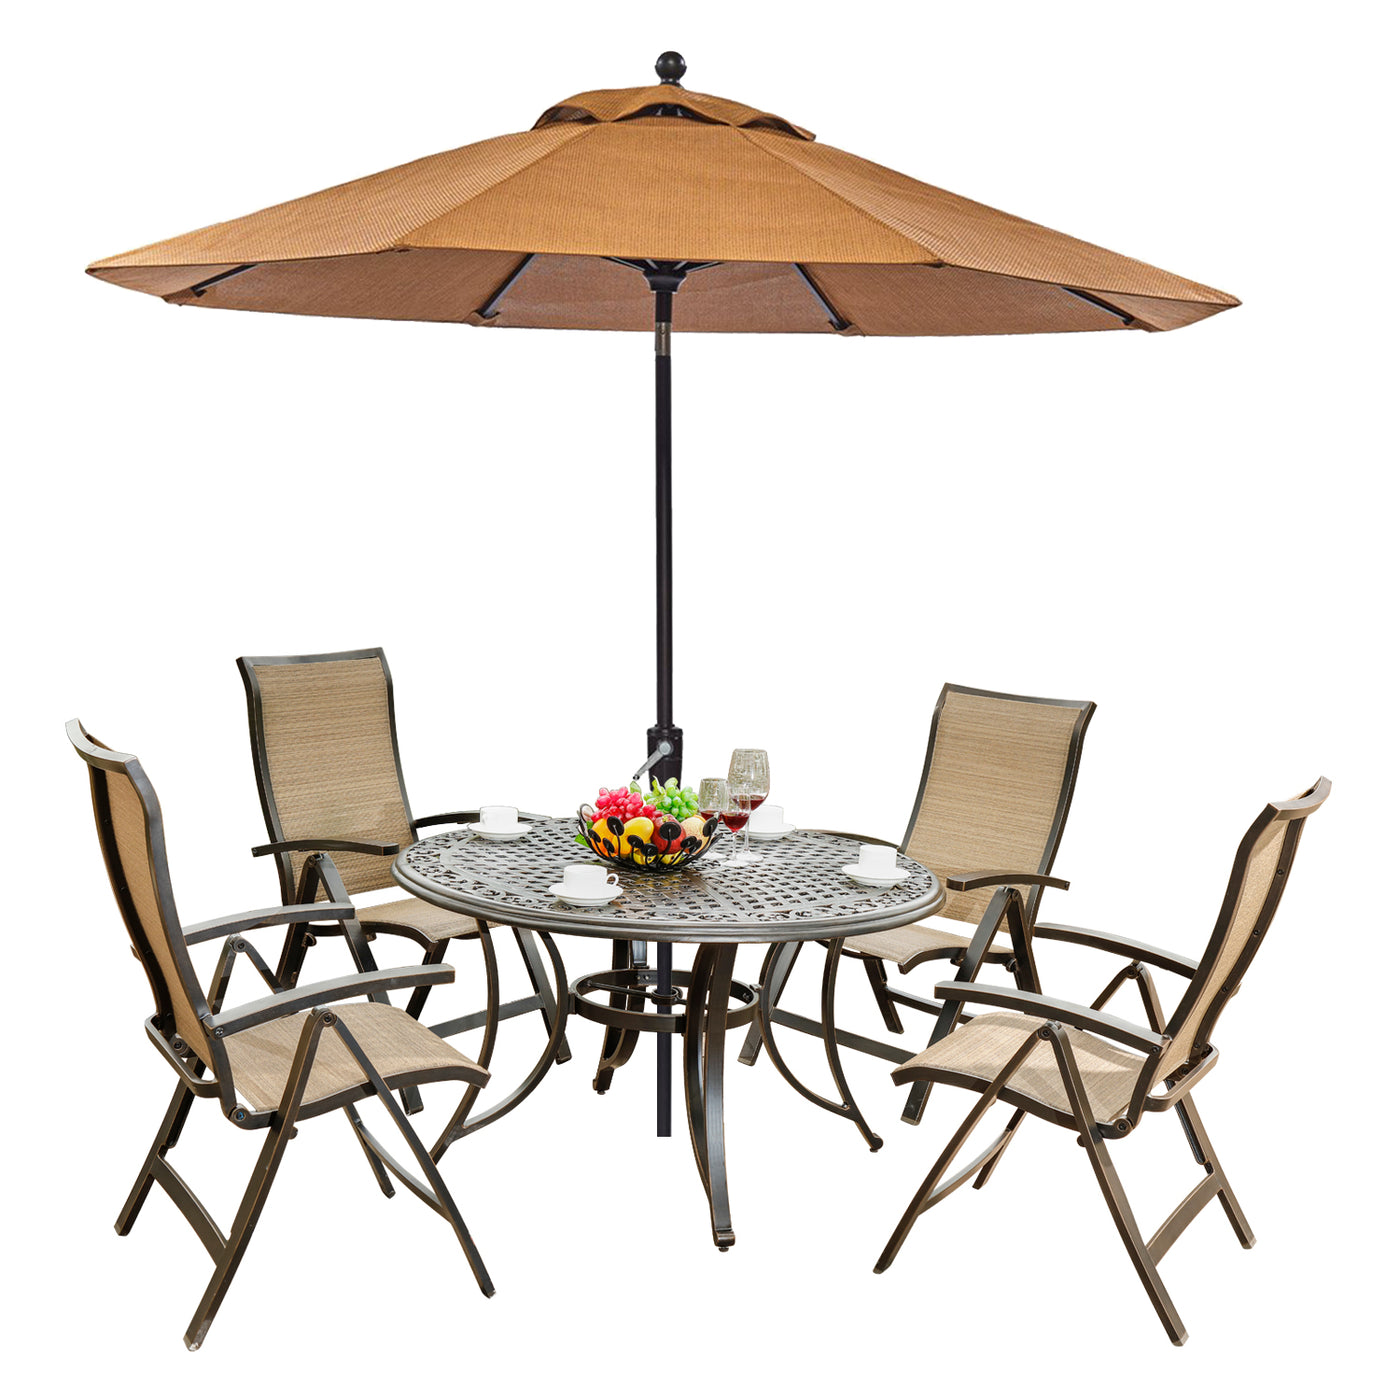 Outdoor 6 Piece of Folding Chairs,48" Dining Table and Patio Umbrella